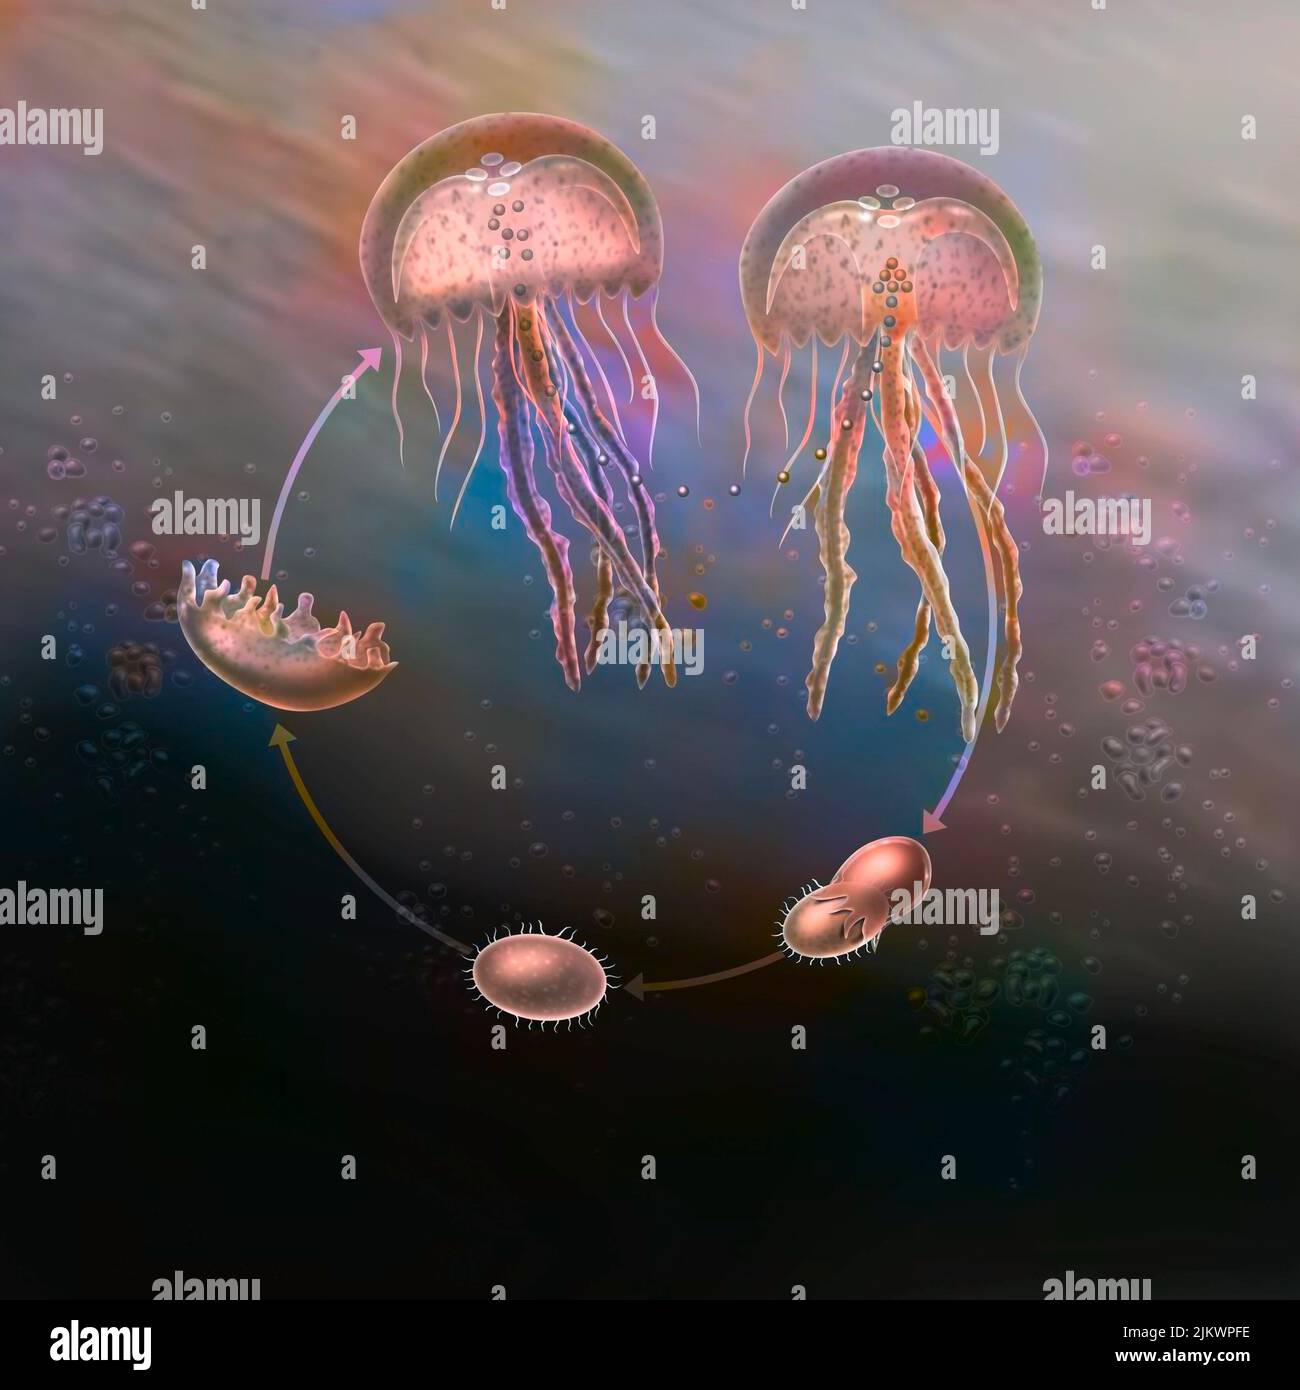 Life cycle of jellyfish (pelagia noctiluca) from fertilization to adulthood. Stock Photo